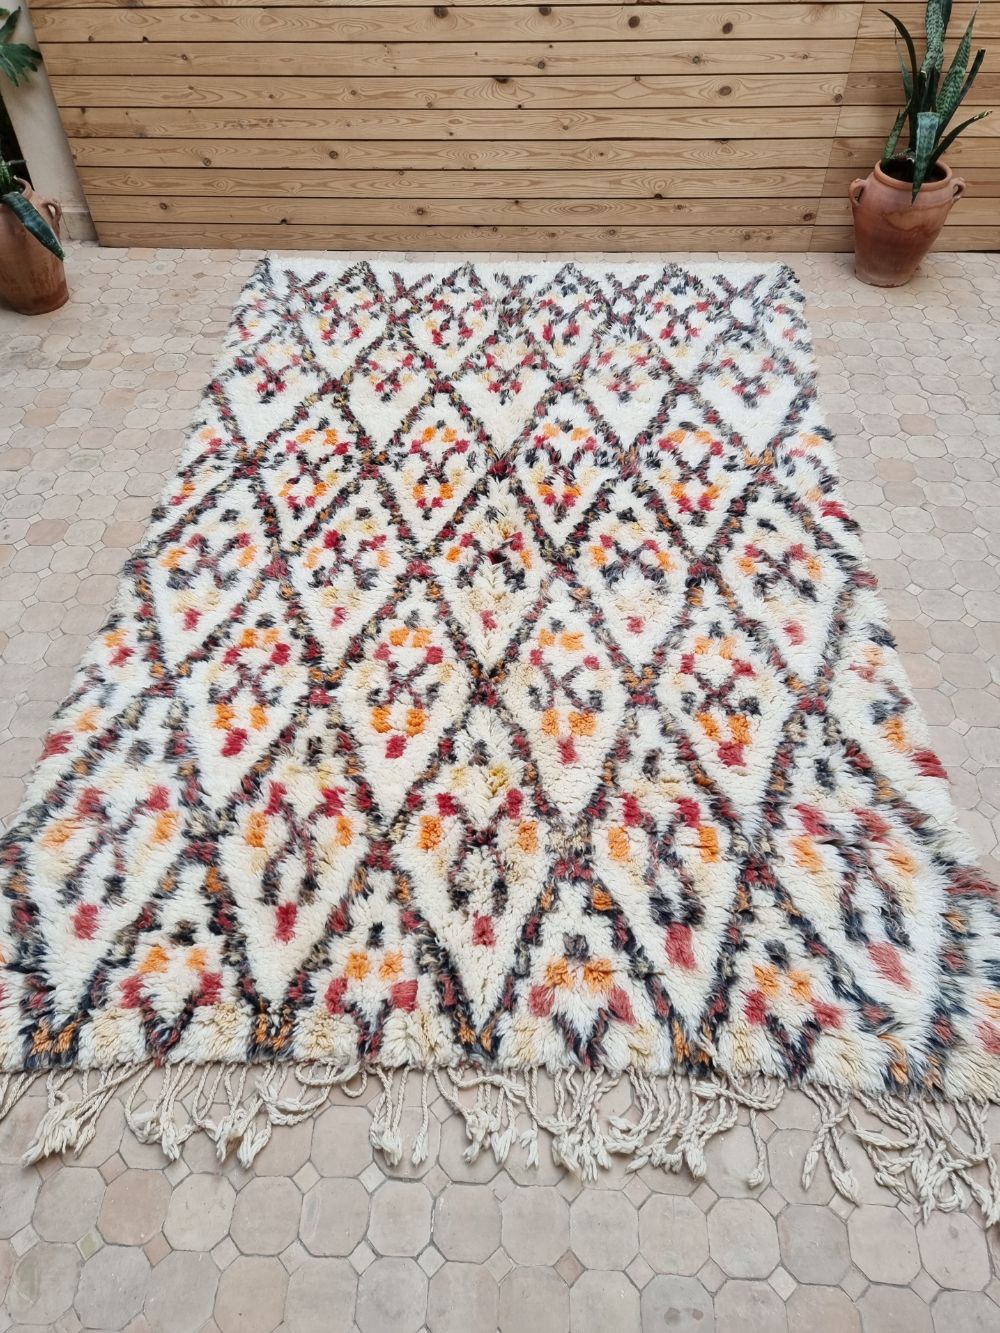 Order by Size: Moroccan Beldi Rug